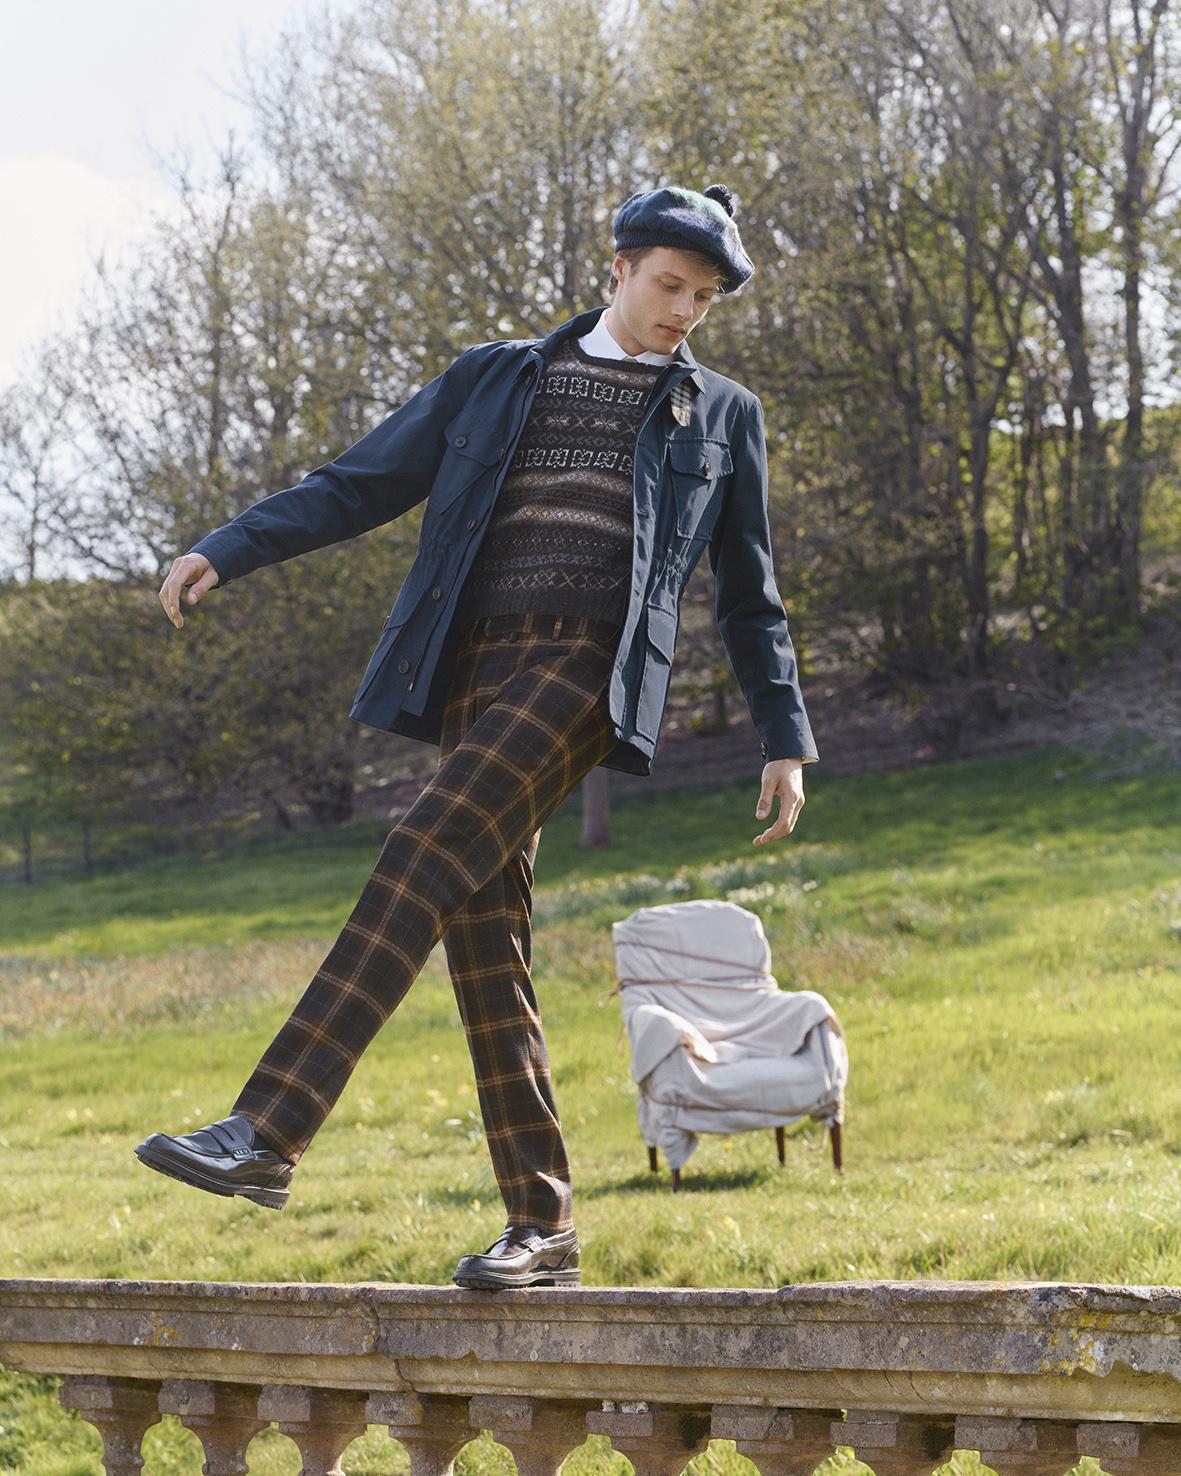 A Classic Thames House Inspires DAKS’s Autumn/Winter 2022 Collection